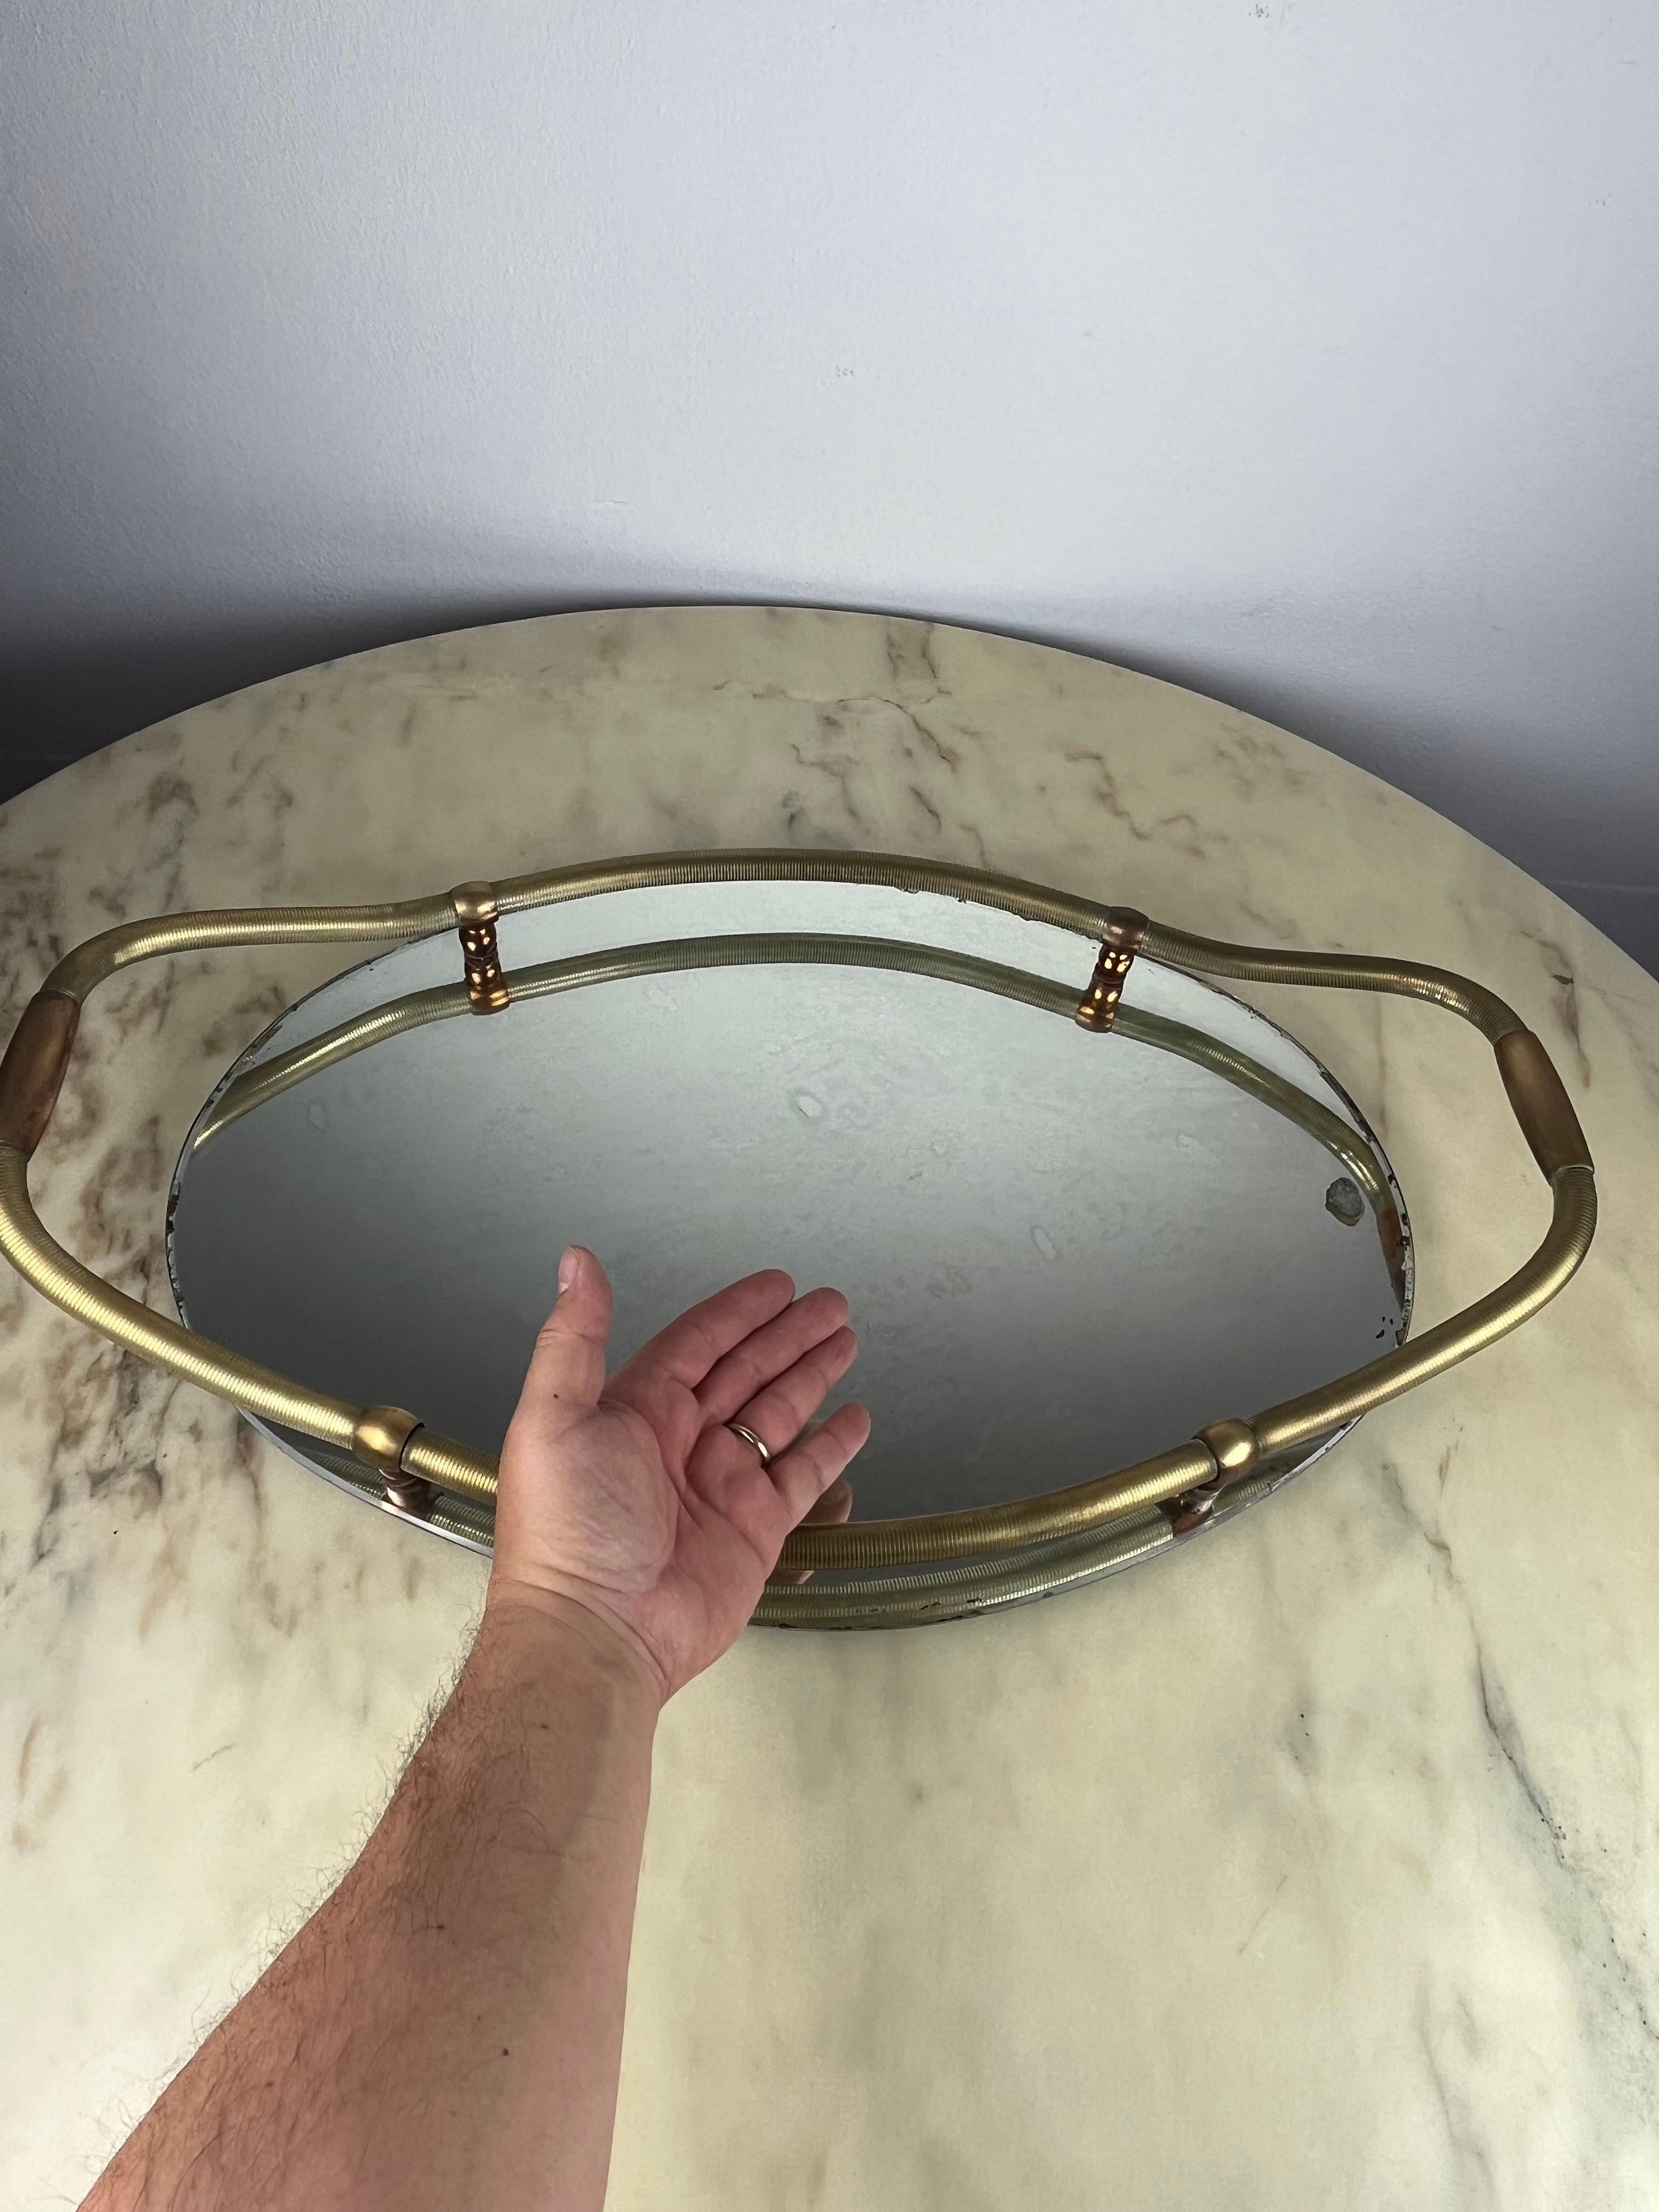 Large oval tray in brass and mirror, Italy, 1940s
Wedding gift from my great-grandparents, purchased in the best-known jewelry store in my city.
Small signs of time and use.